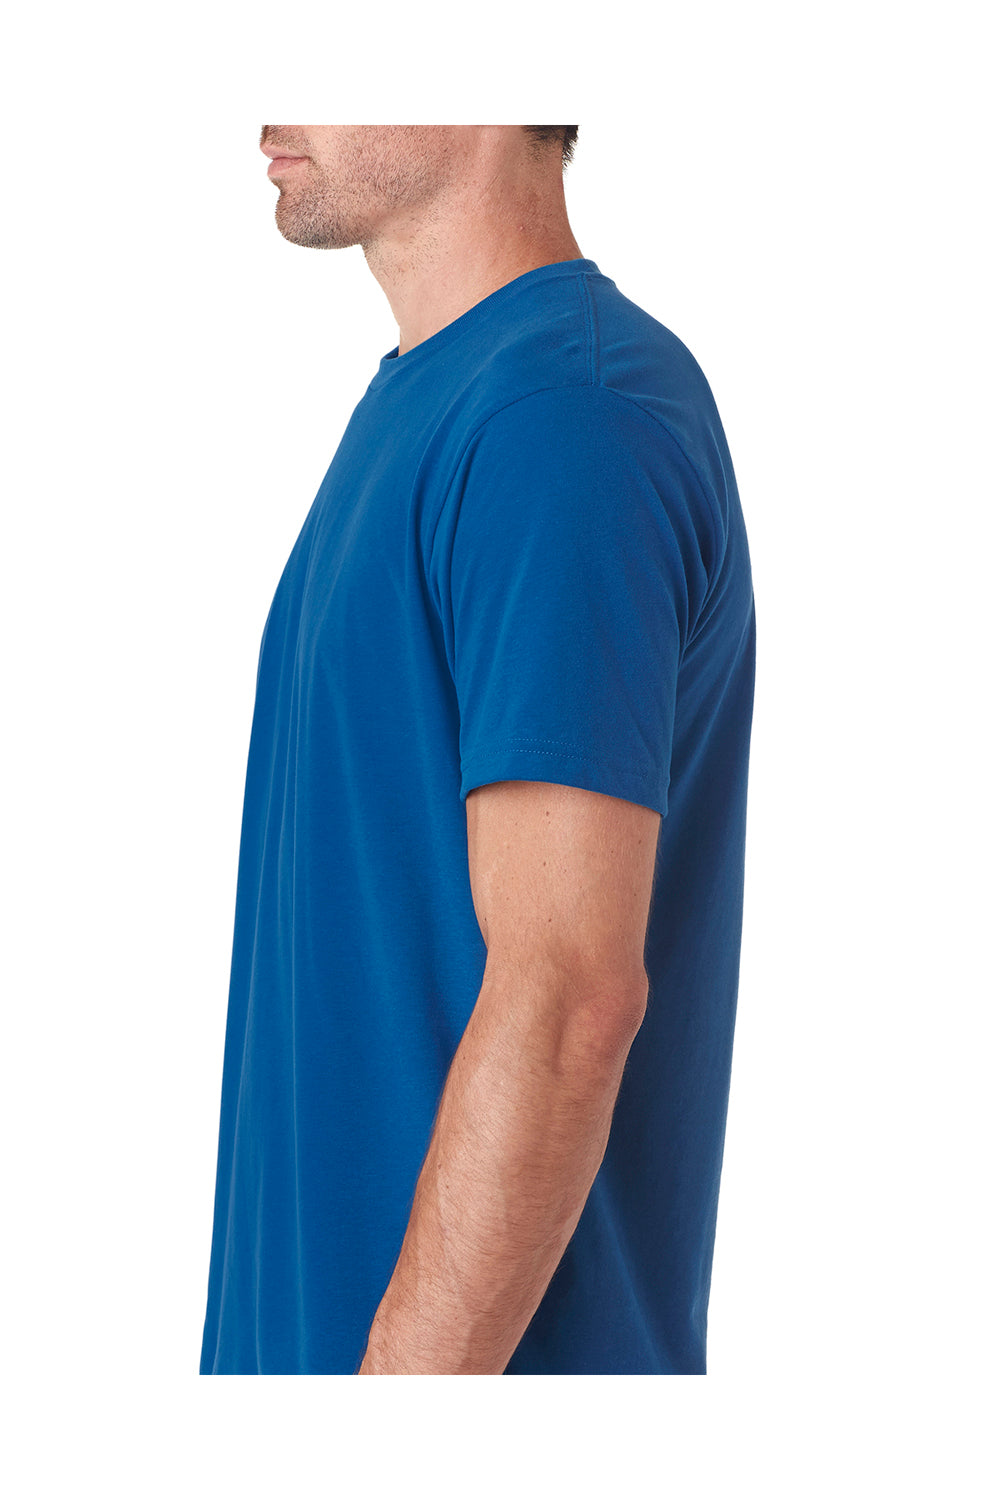 Next Level 6410 Mens Sueded Jersey Short Sleeve Crewneck T-Shirt Cool Blue Side